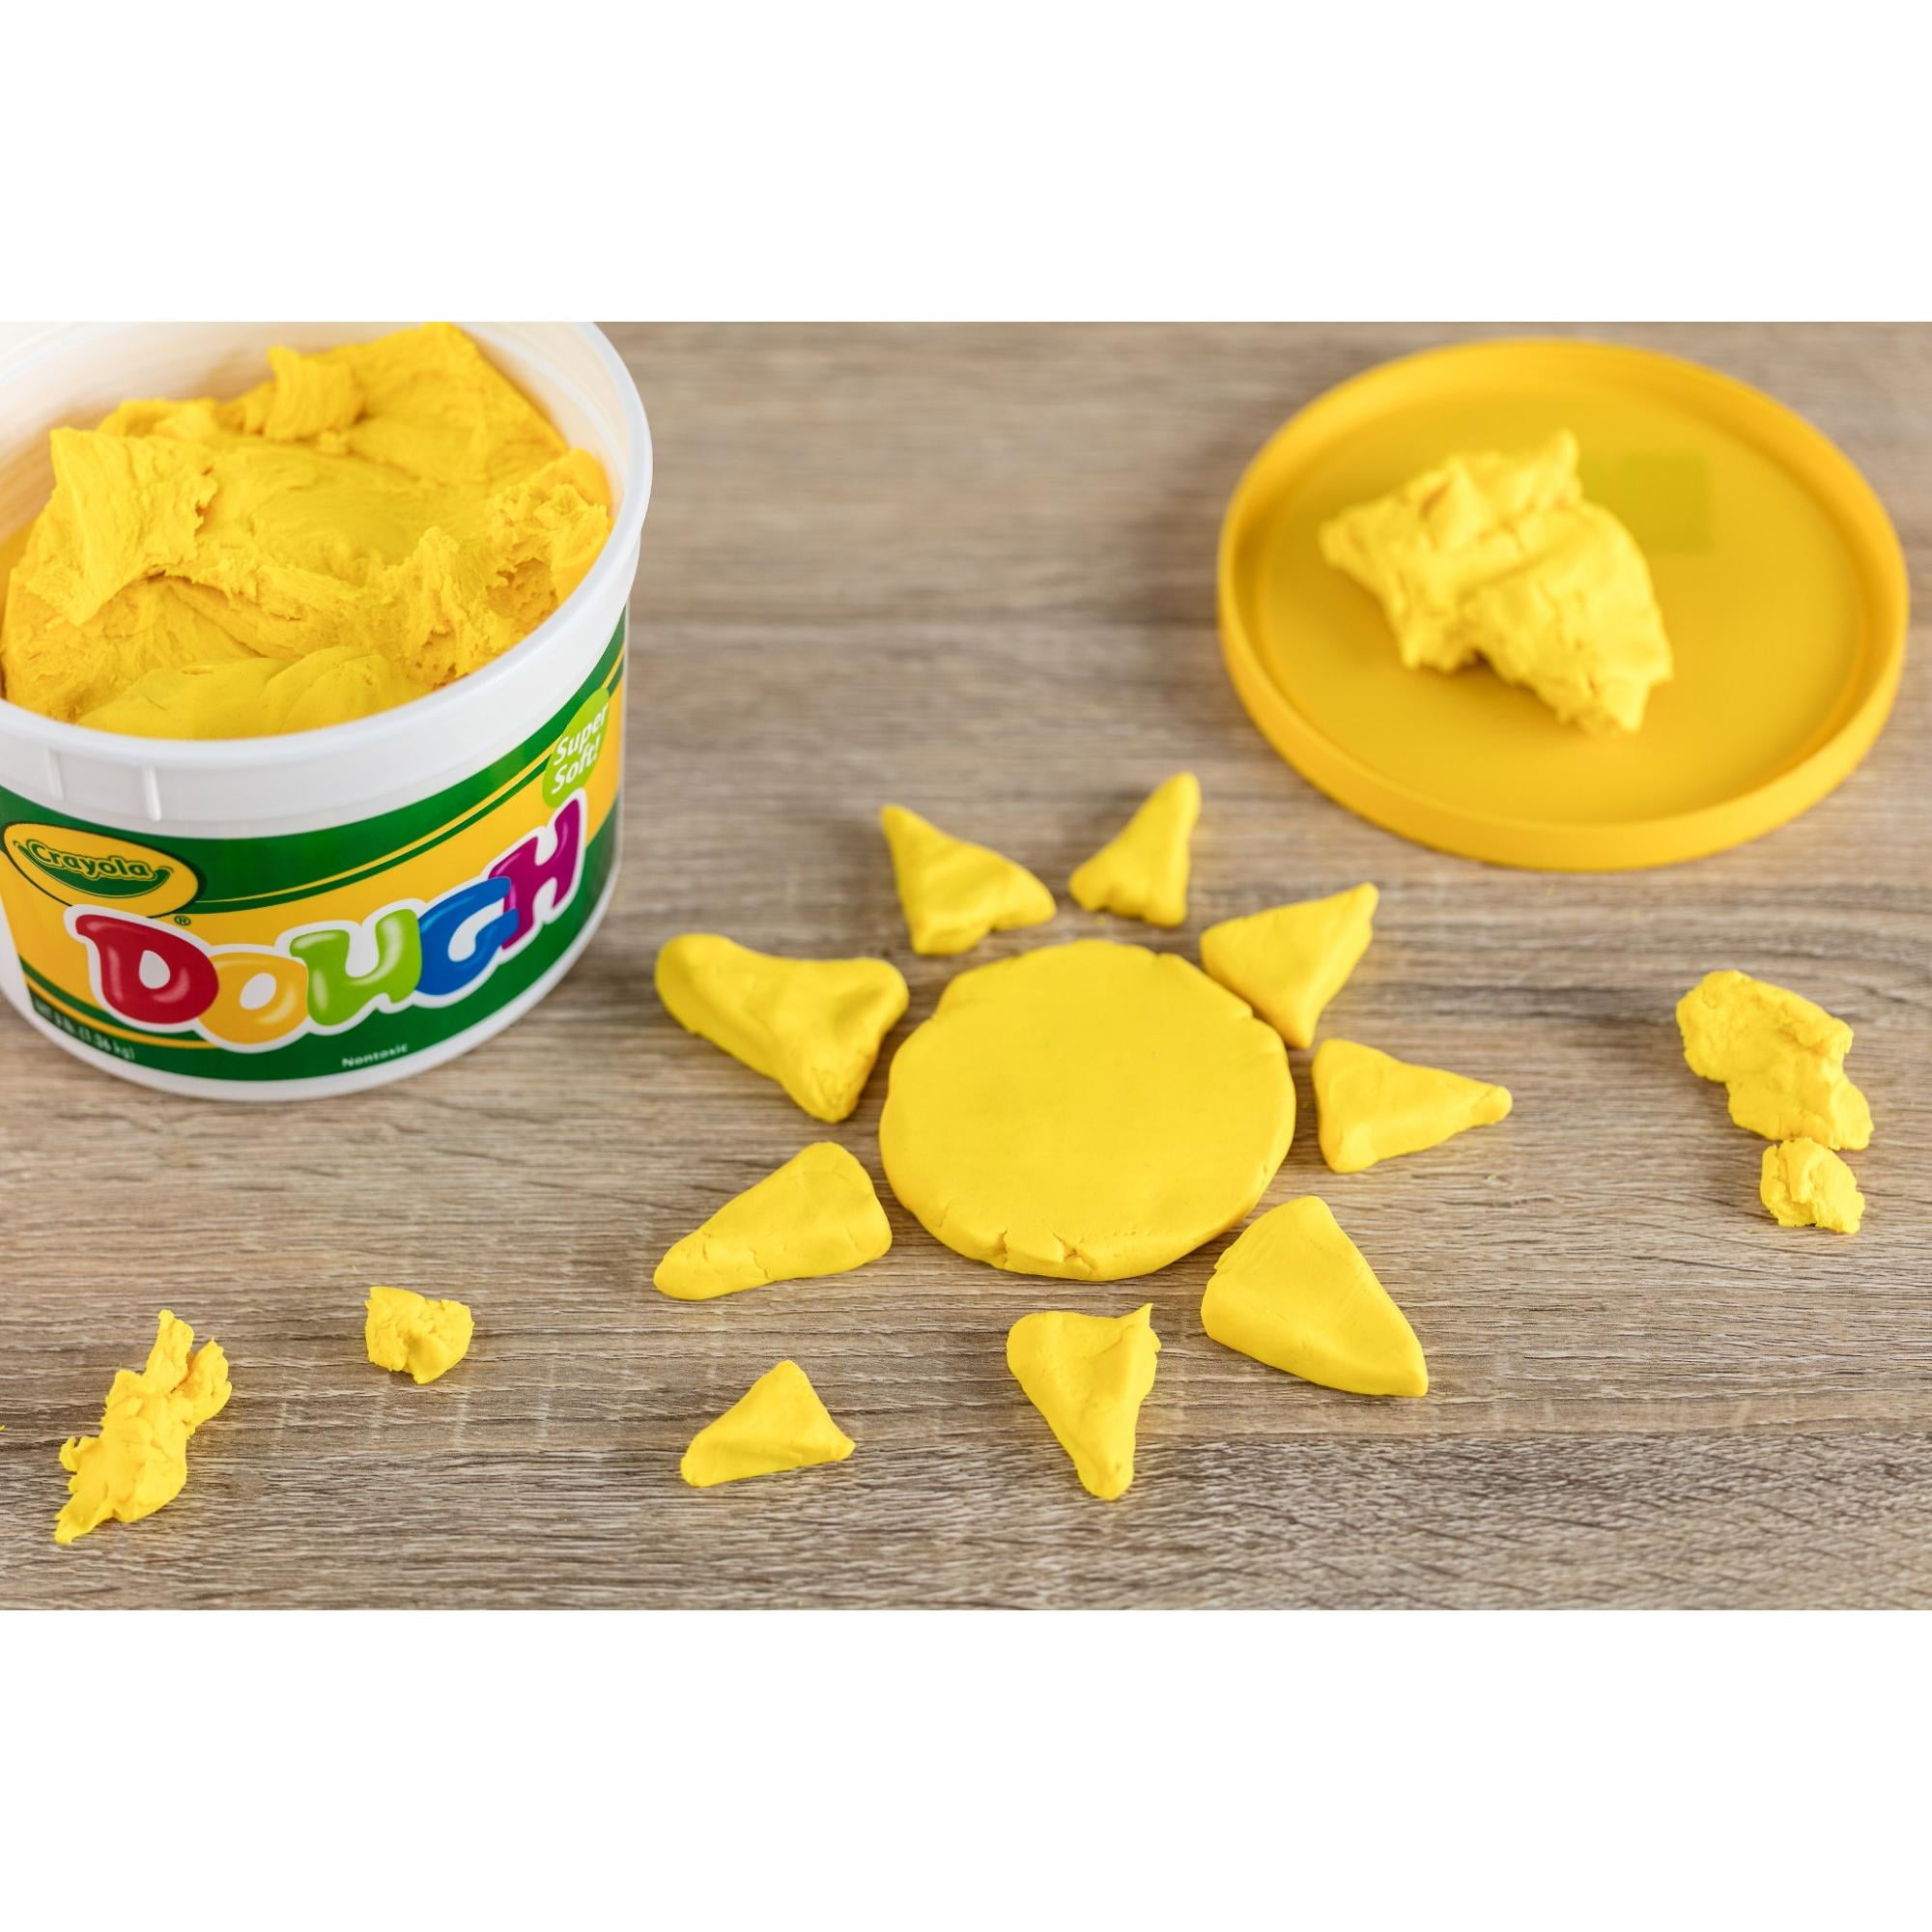 Crayola Dough - Yellow (3lb), Bulk Modeling Dough for Kids, Clay  Alternative, Resealable Tub, Ages 3+, Great for Kids Arts & Crafts